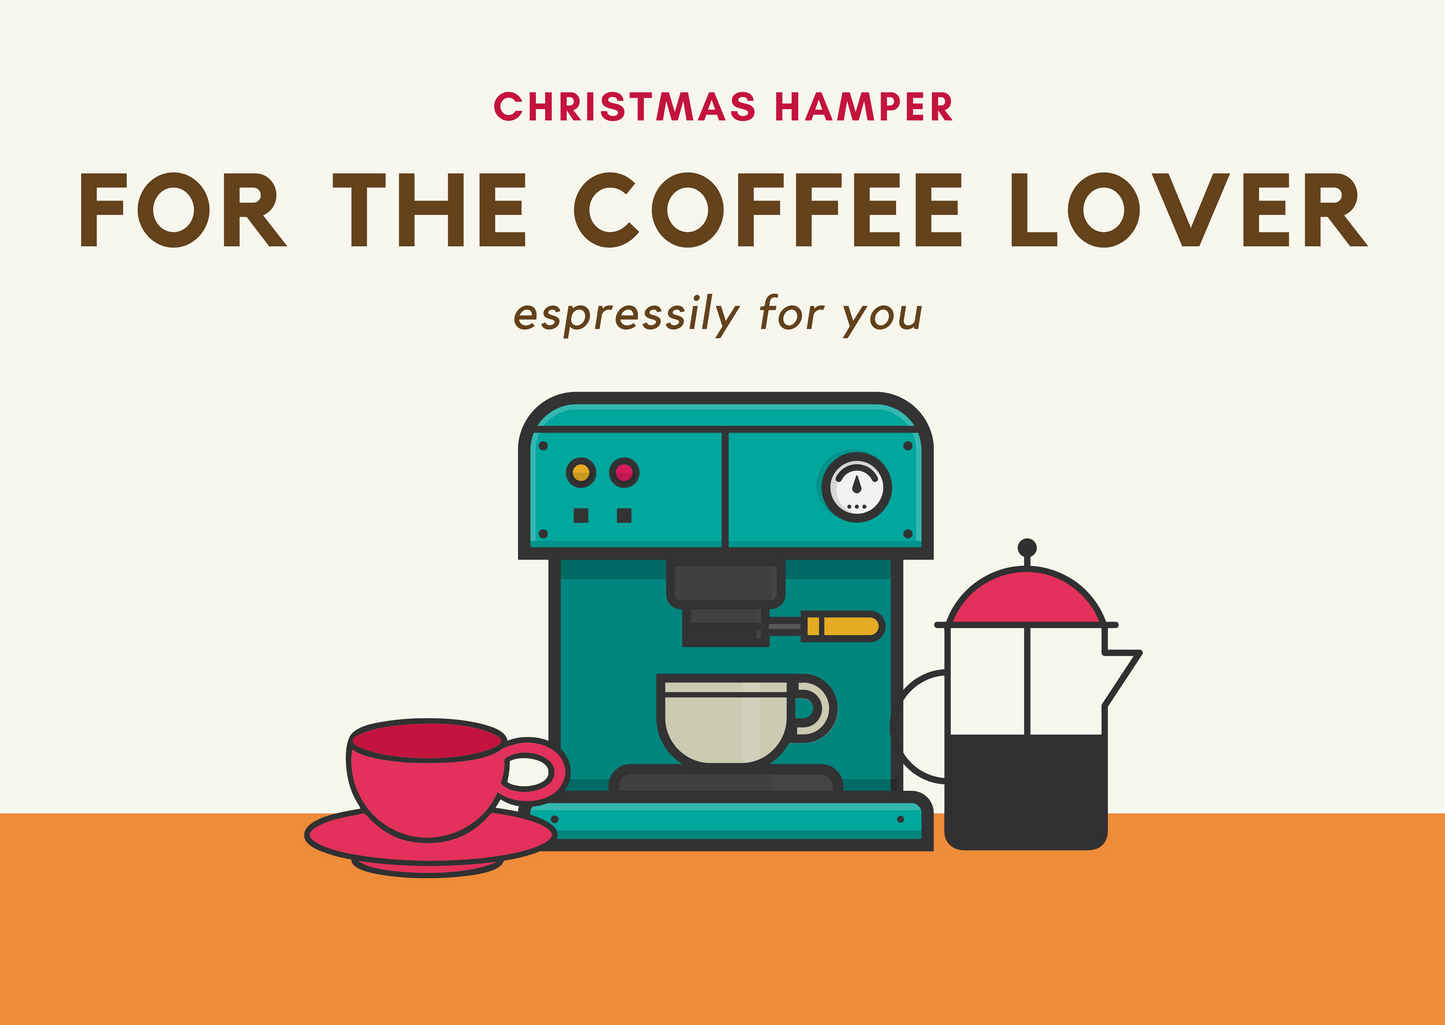 Christmas Hamper For the Coffee Lover